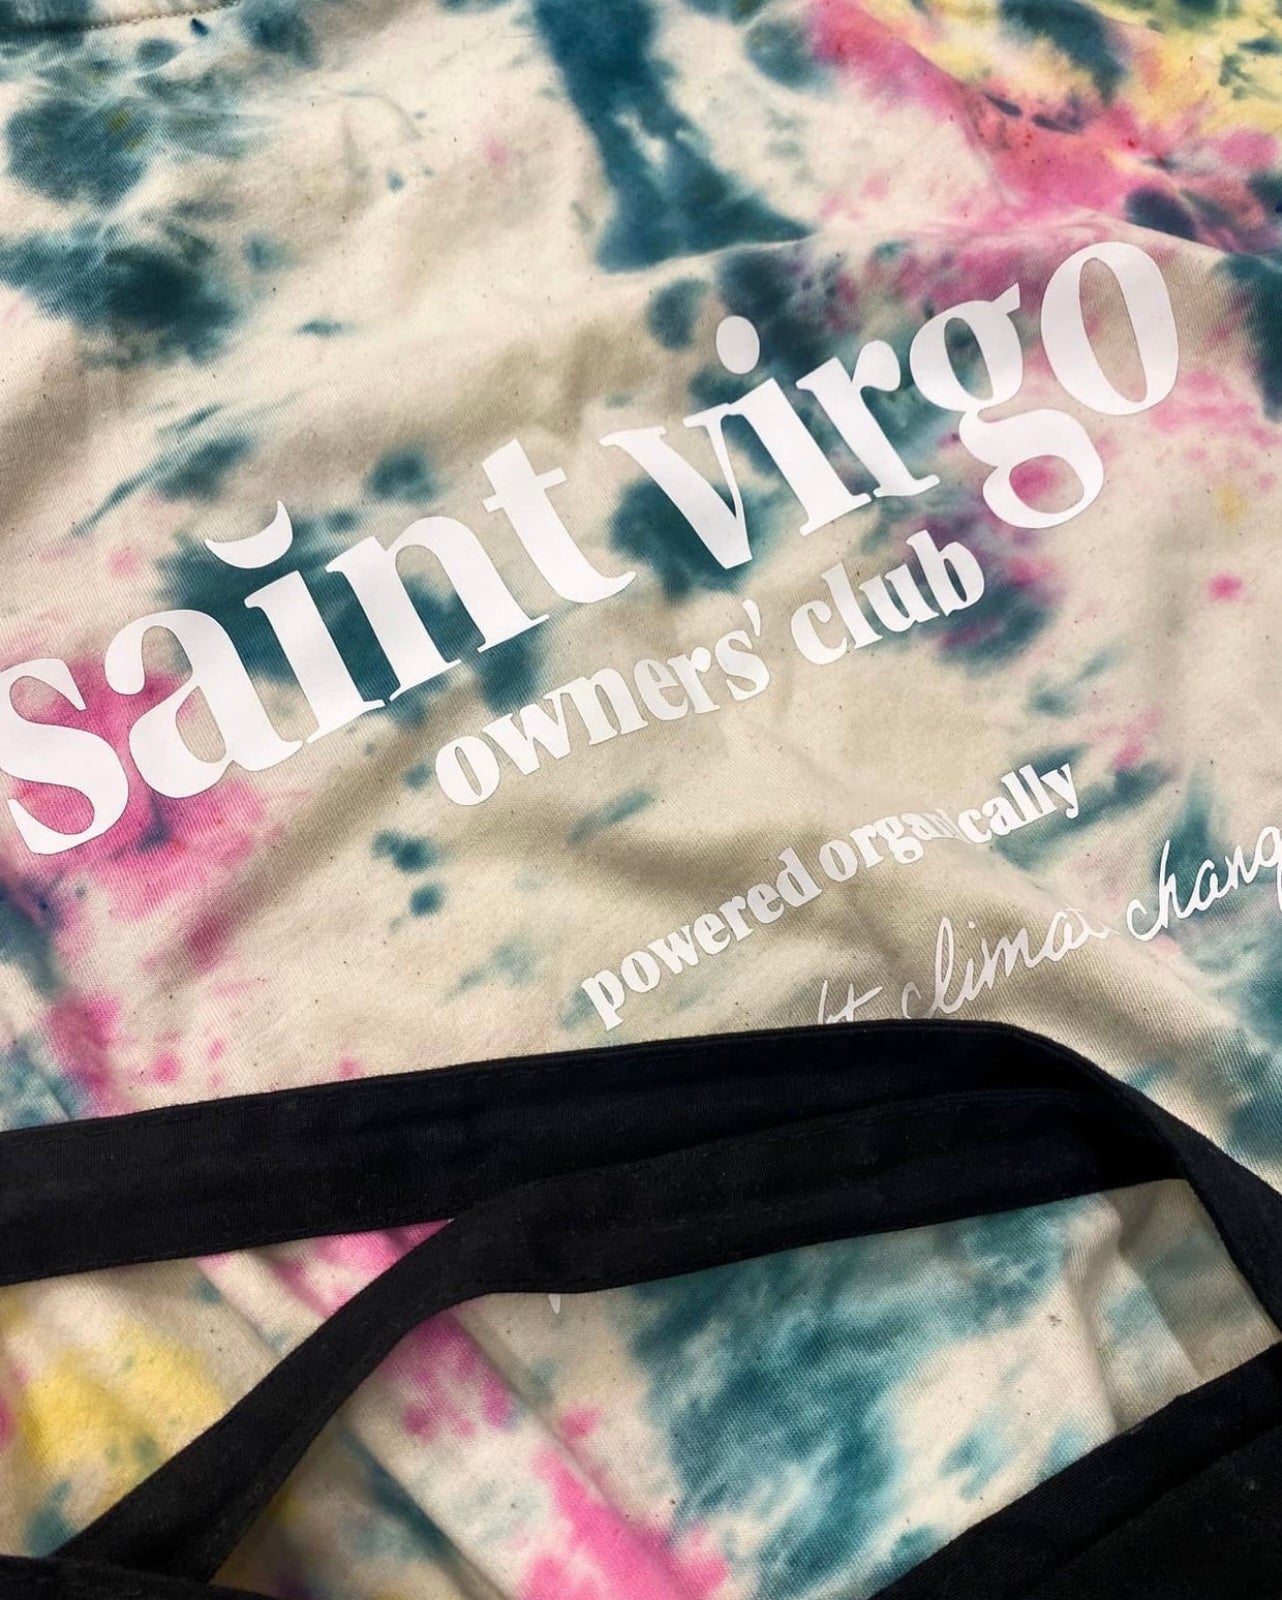 Join The Saint Virgo Owners' Club